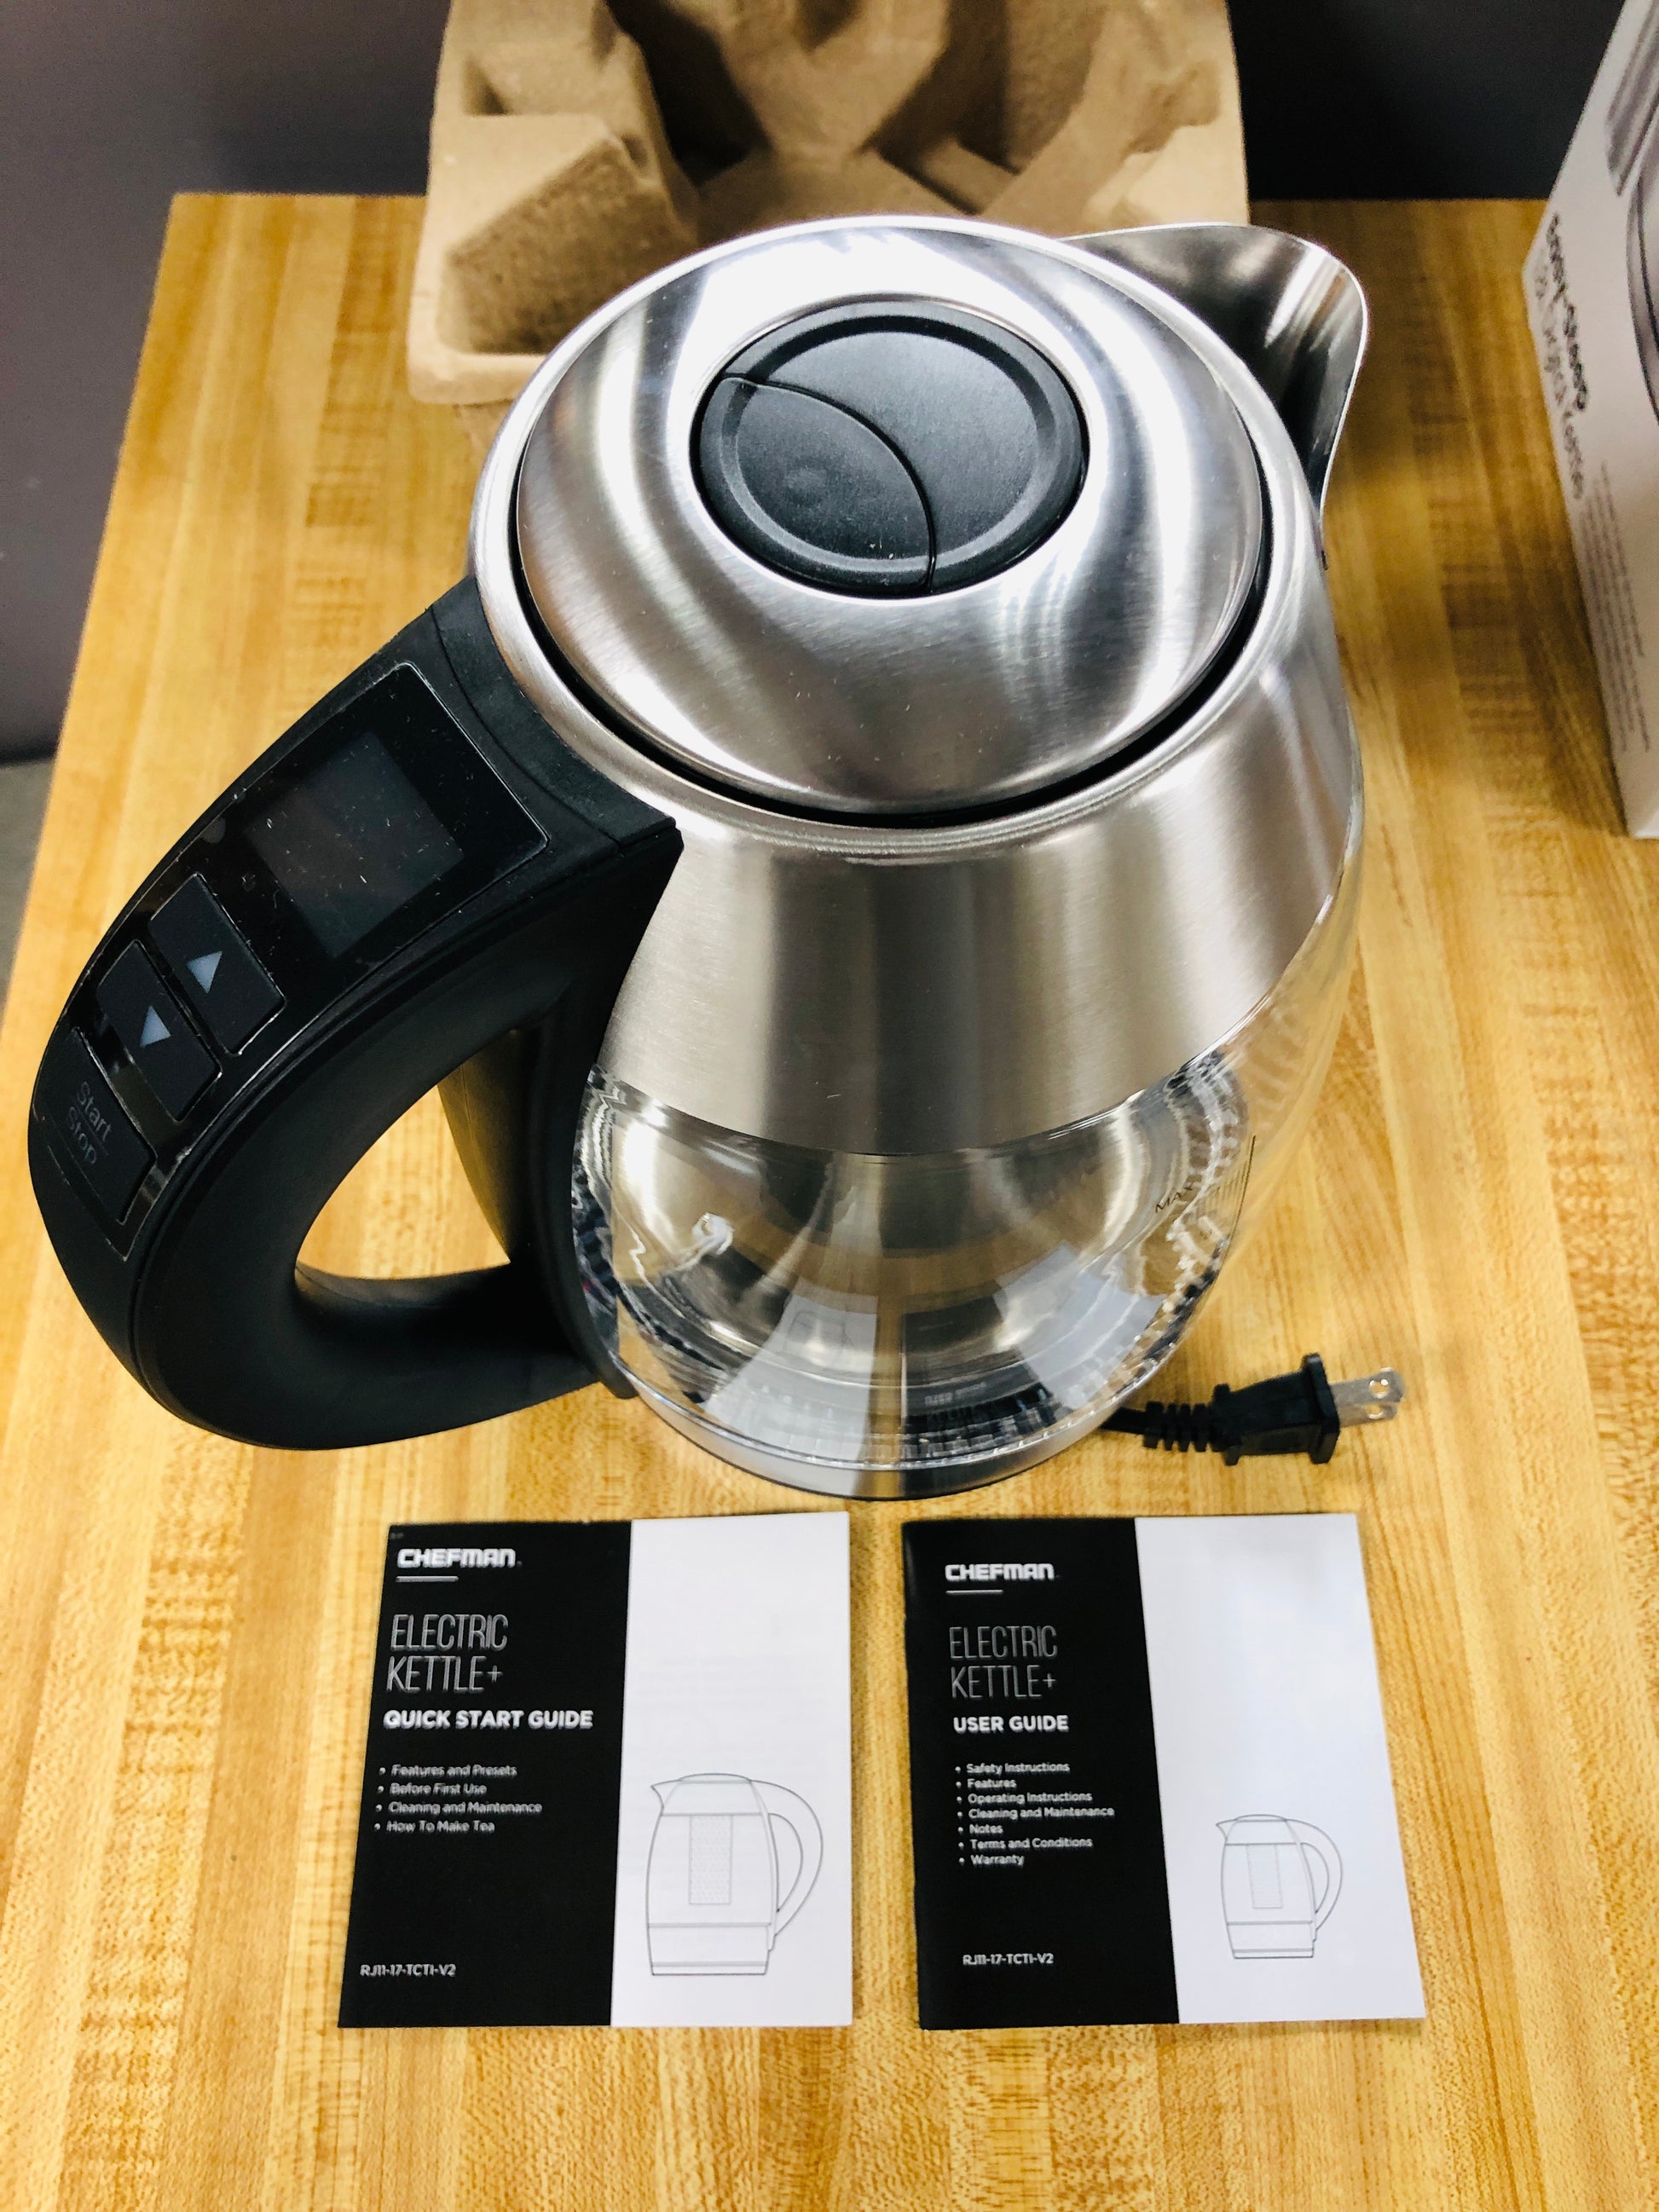 As is Chefman 1.8L Digital Precision Electric Kettle with Tea